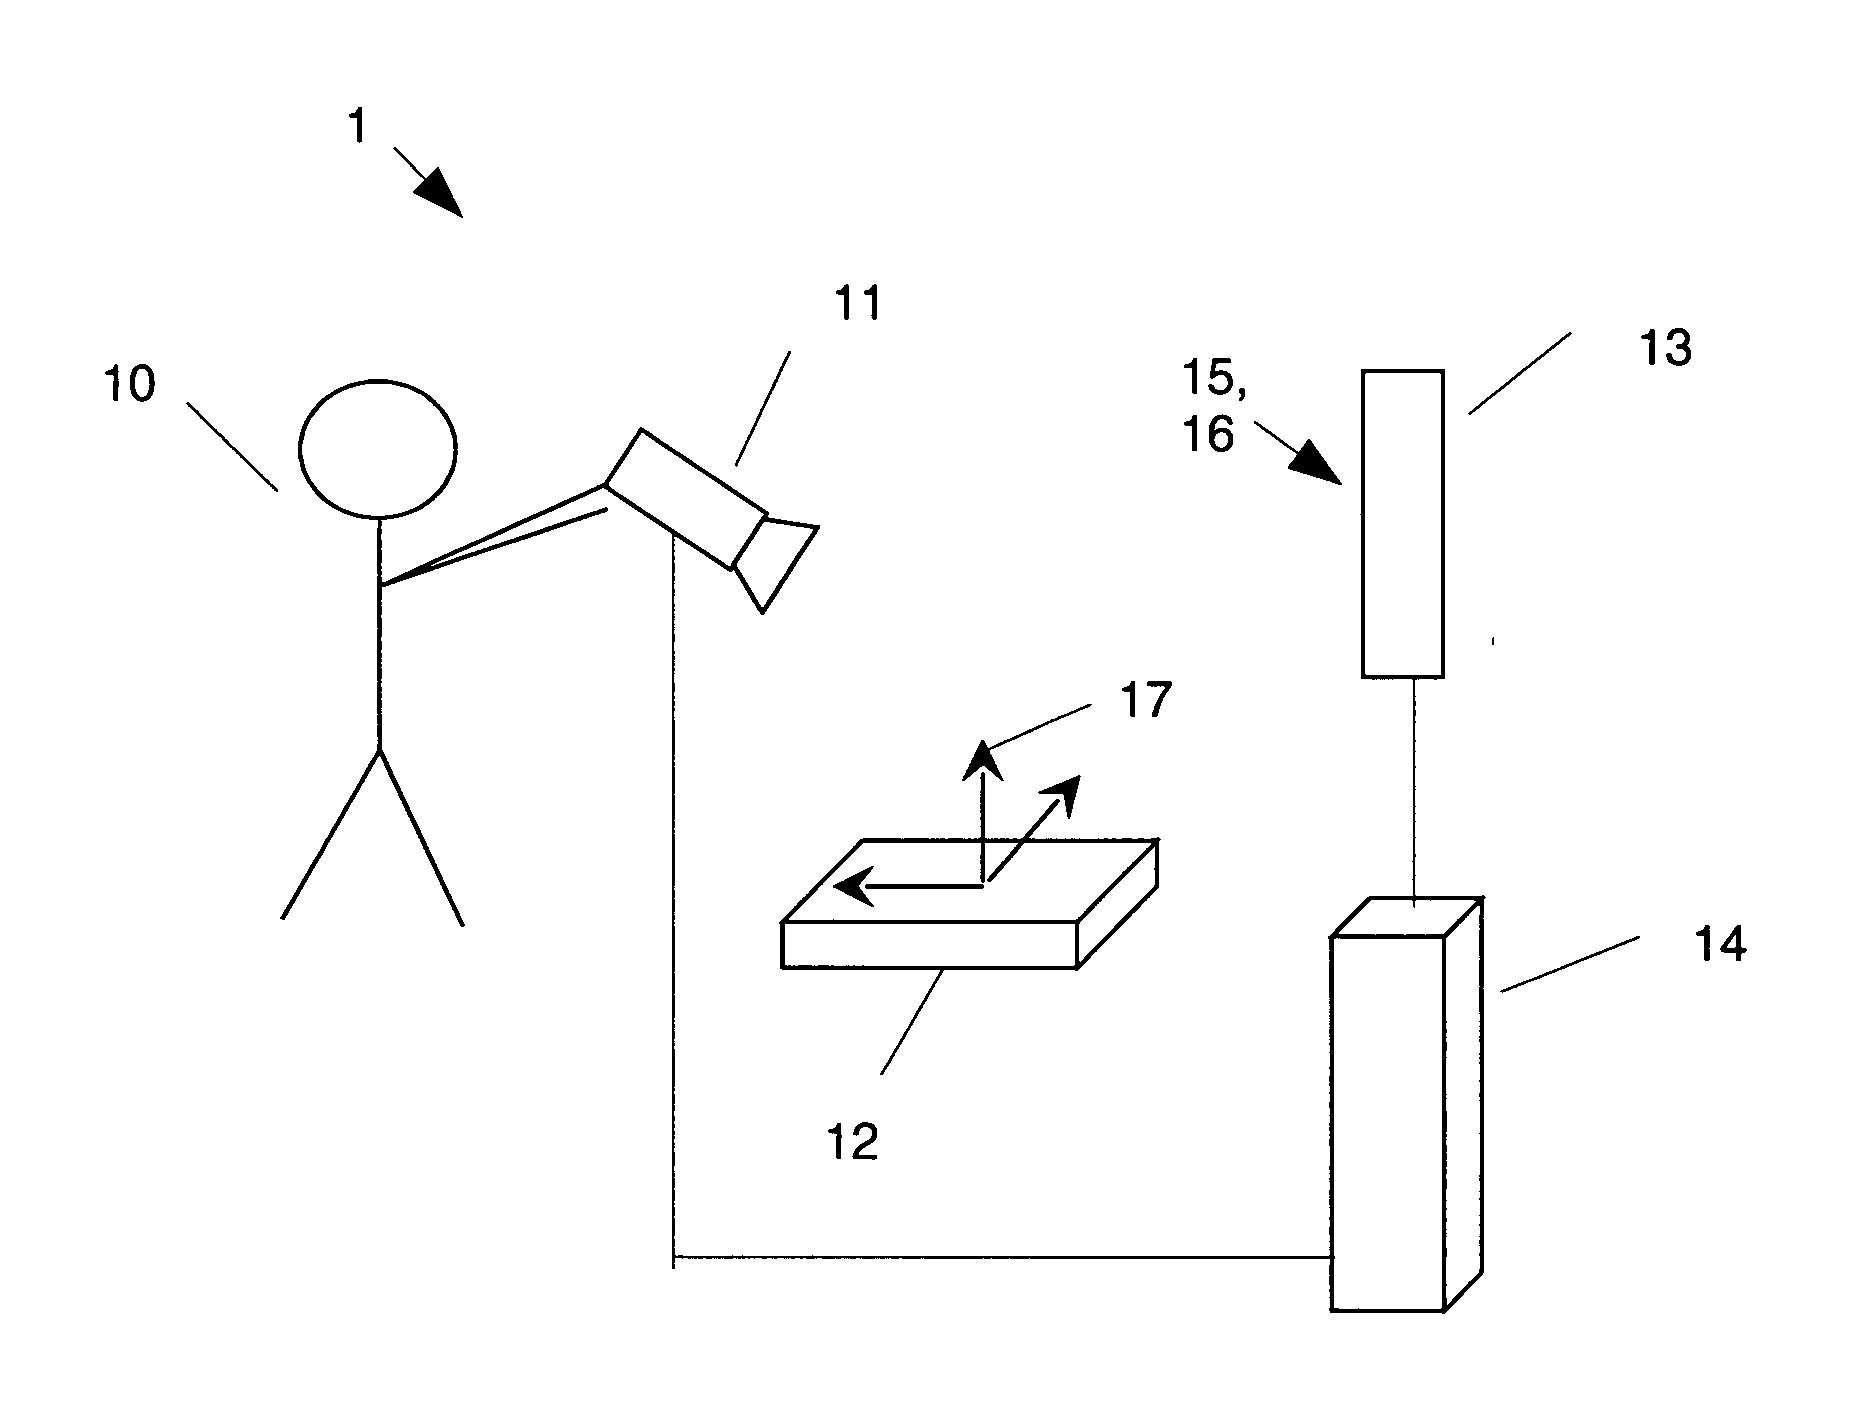 Method and system for analyzing an image generated by at least one camera